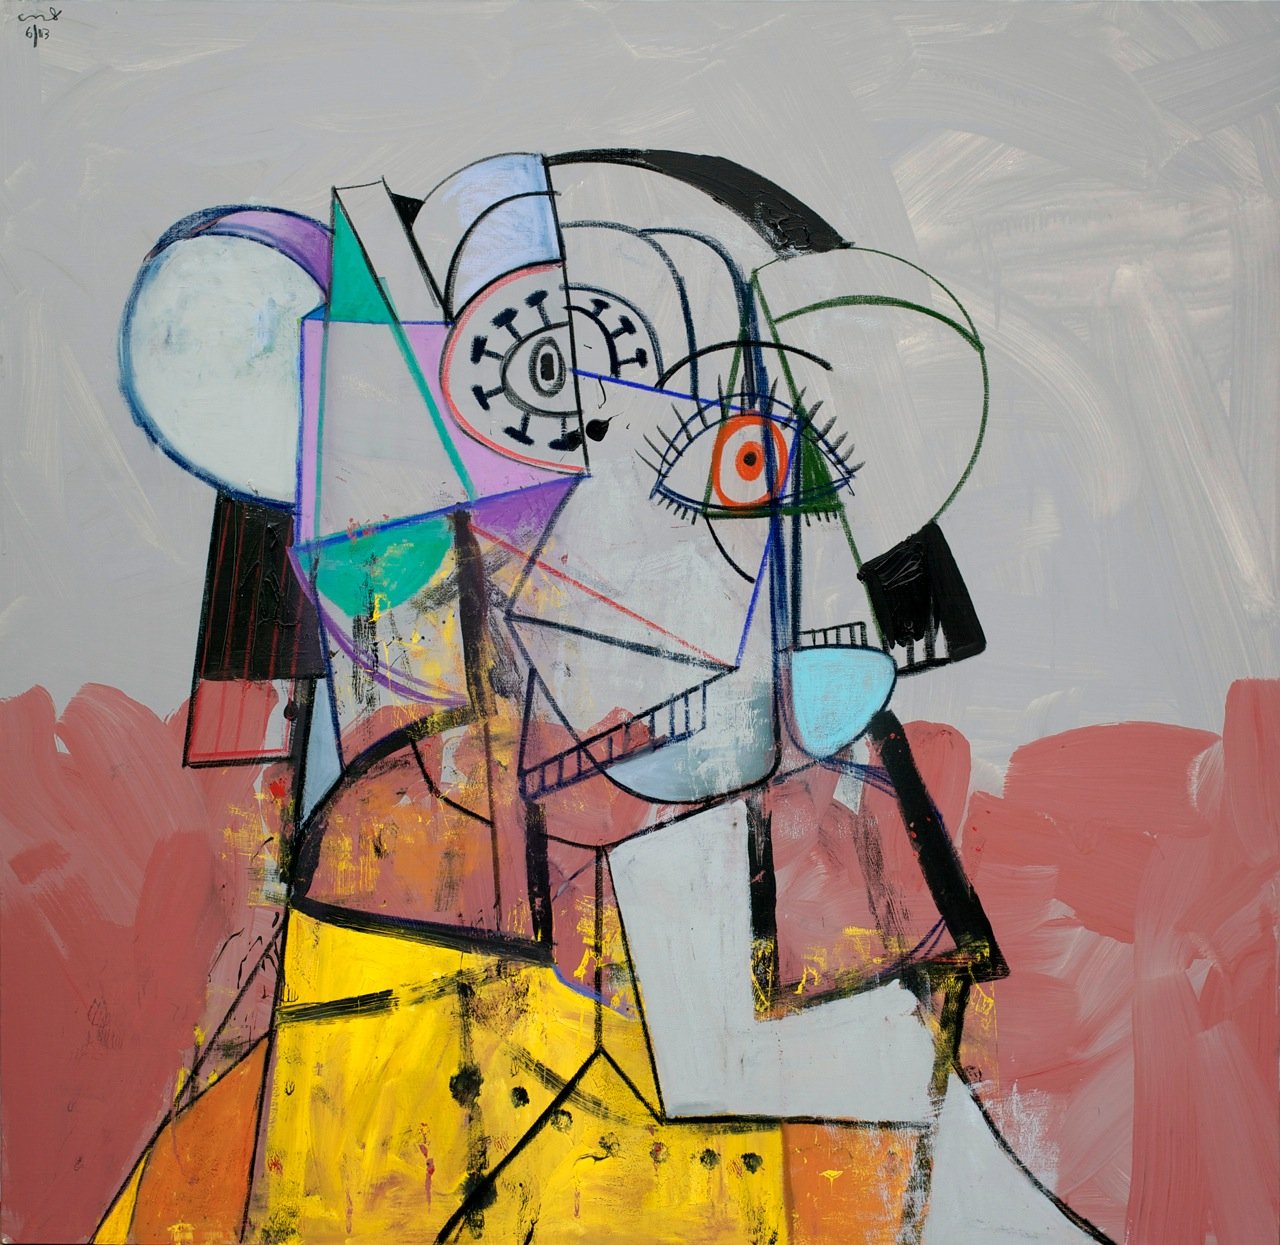 George Condo Portrait with Grey Forms (2013) Photo: Courtesy of the artist and Skarstedt